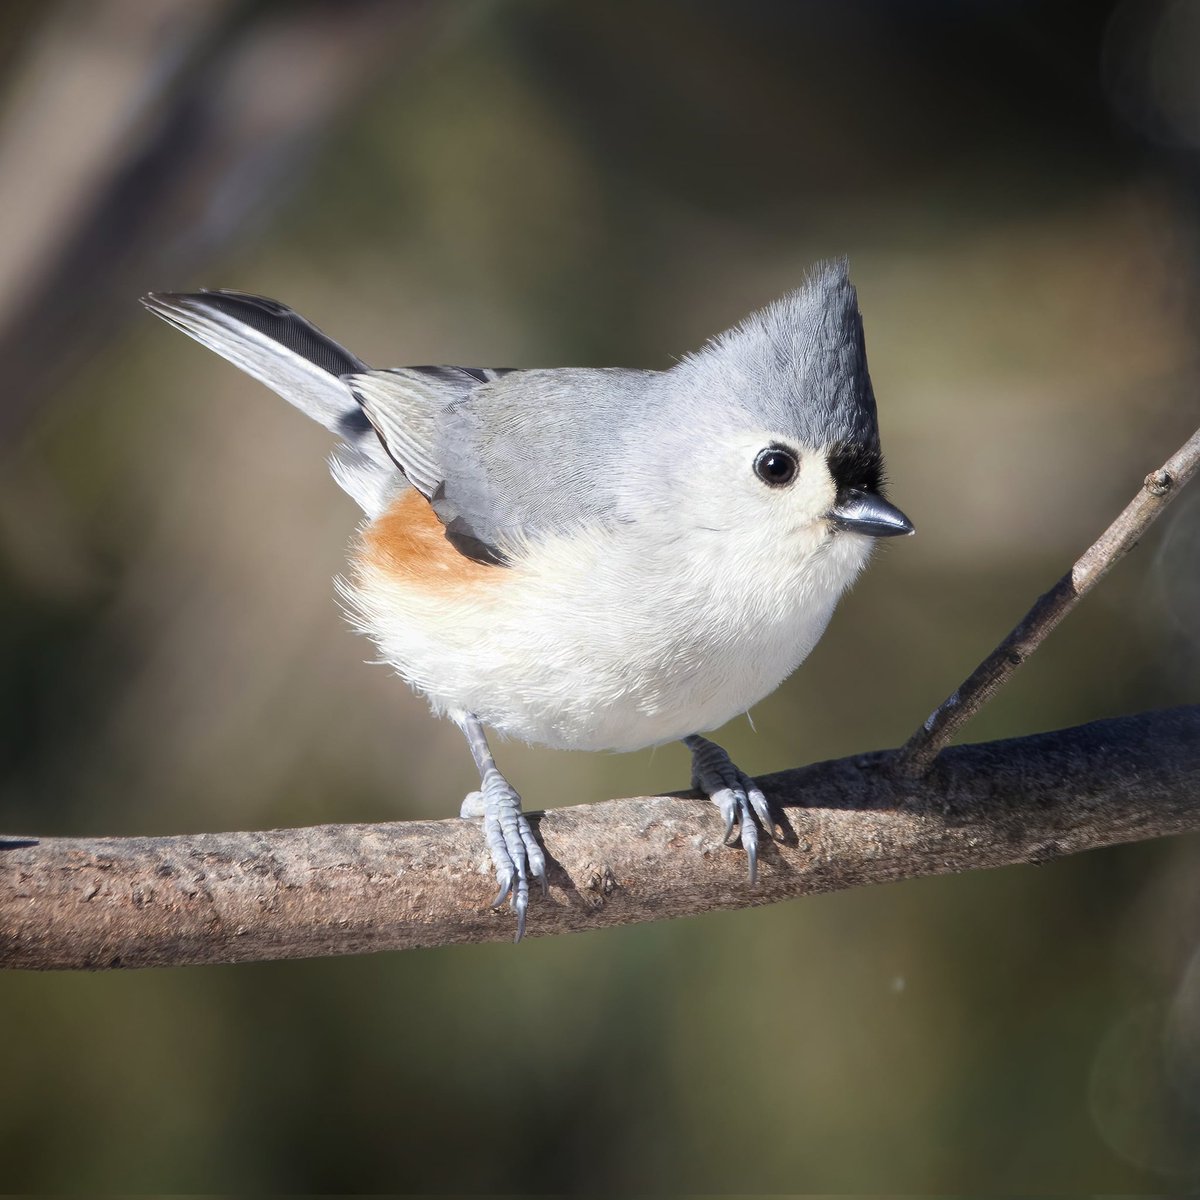 A terrific tufted titmouse for your Thursday!
#tuftedtitmouse #tuftastic #tufted #titmice #birds #titmouse #ohiobirdworld #ohiobirding #ohiobirder #ohiobackyardbirding #ohiobirds #birdlove #birdlovers #birdwatching #birdwatchers #birdlife #birdwatchersdaily